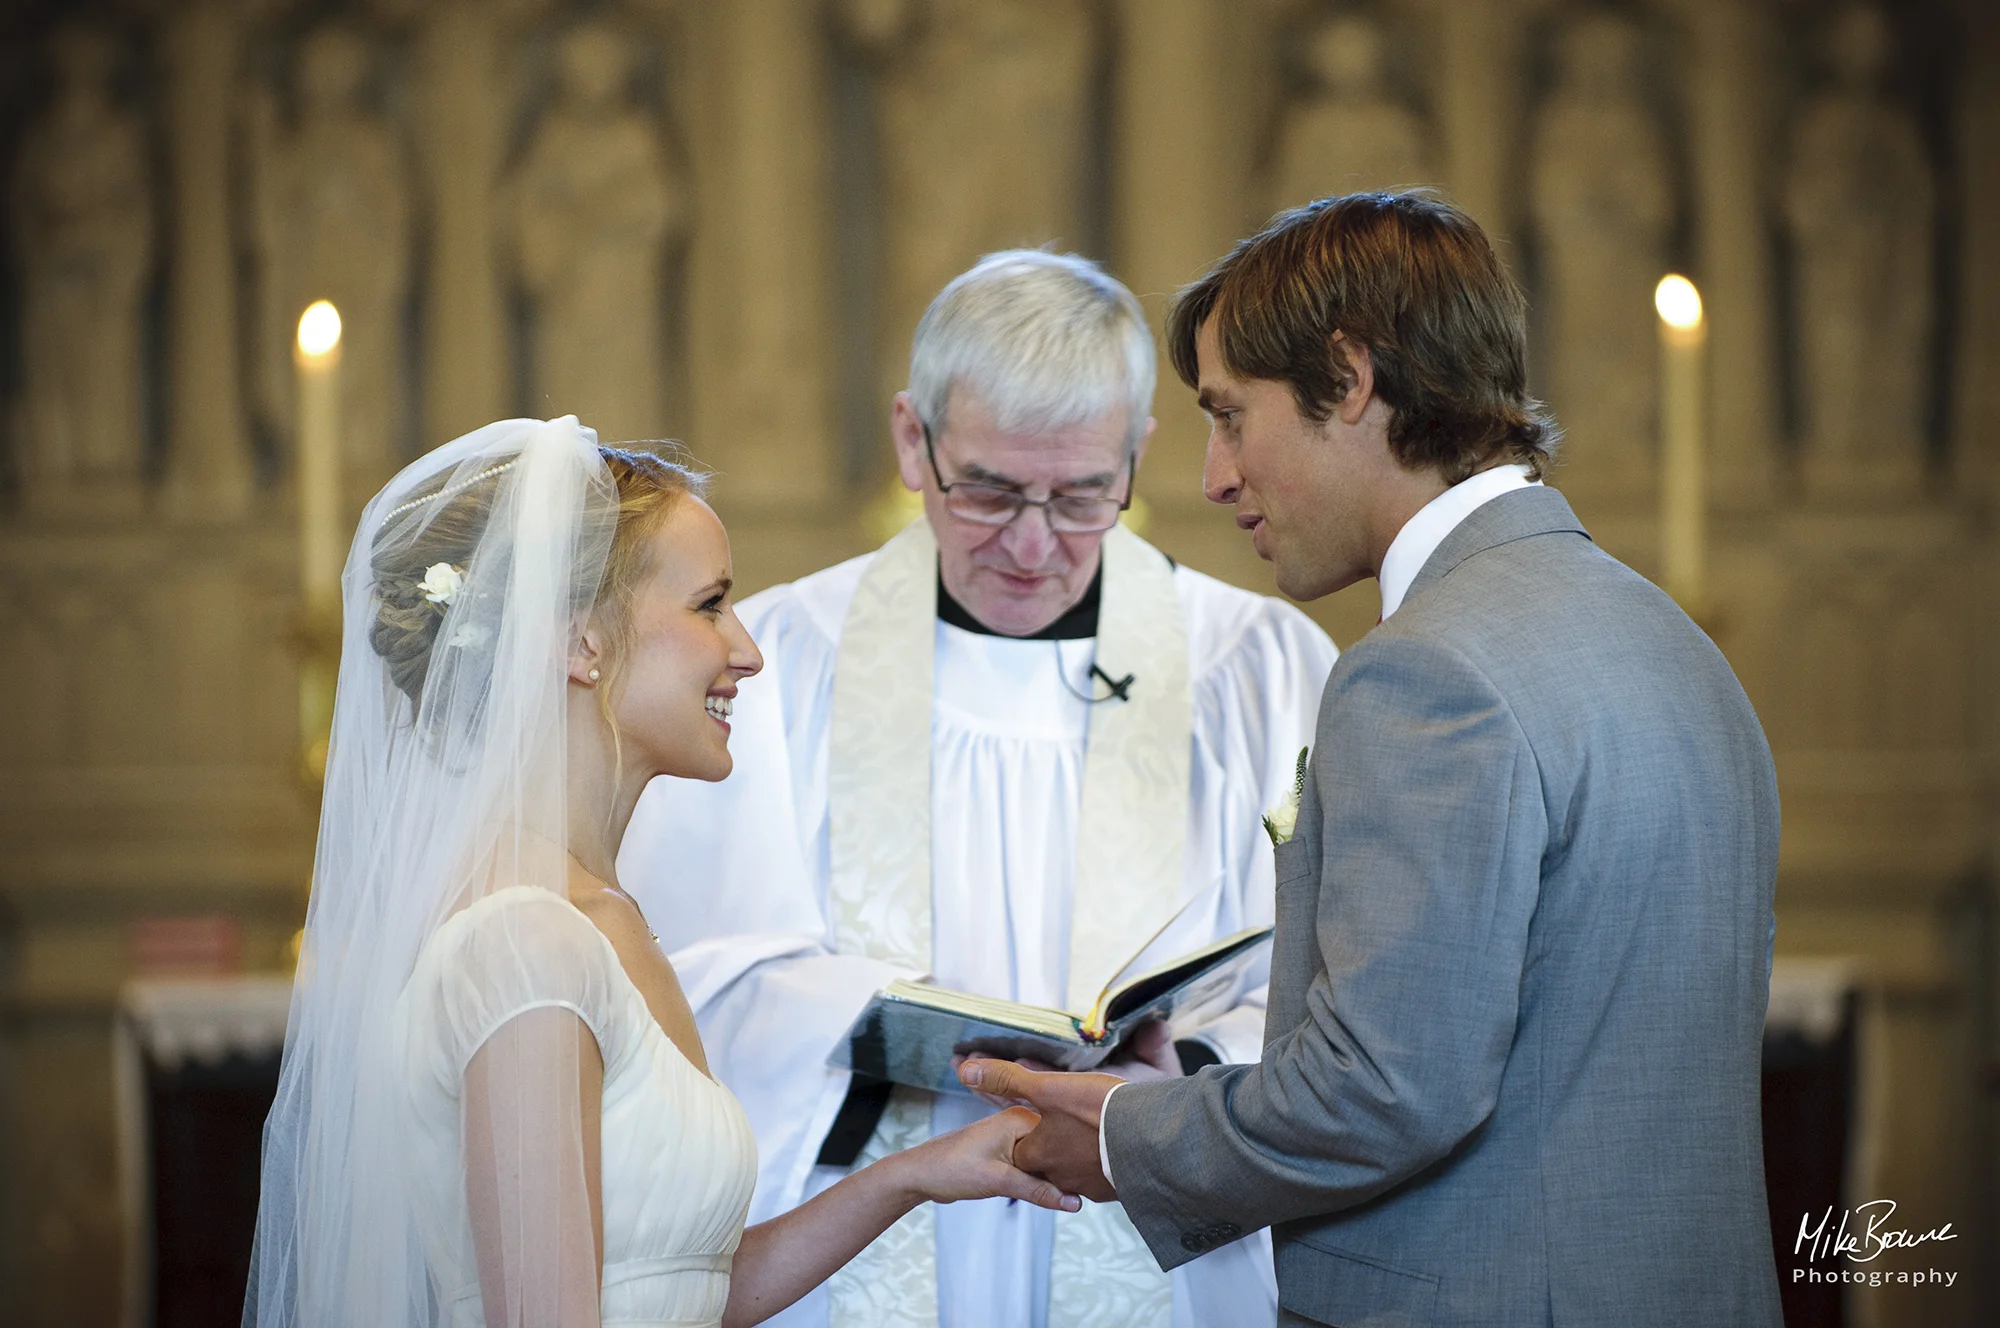 Man speaking his wedding vows to his smiling bride in church